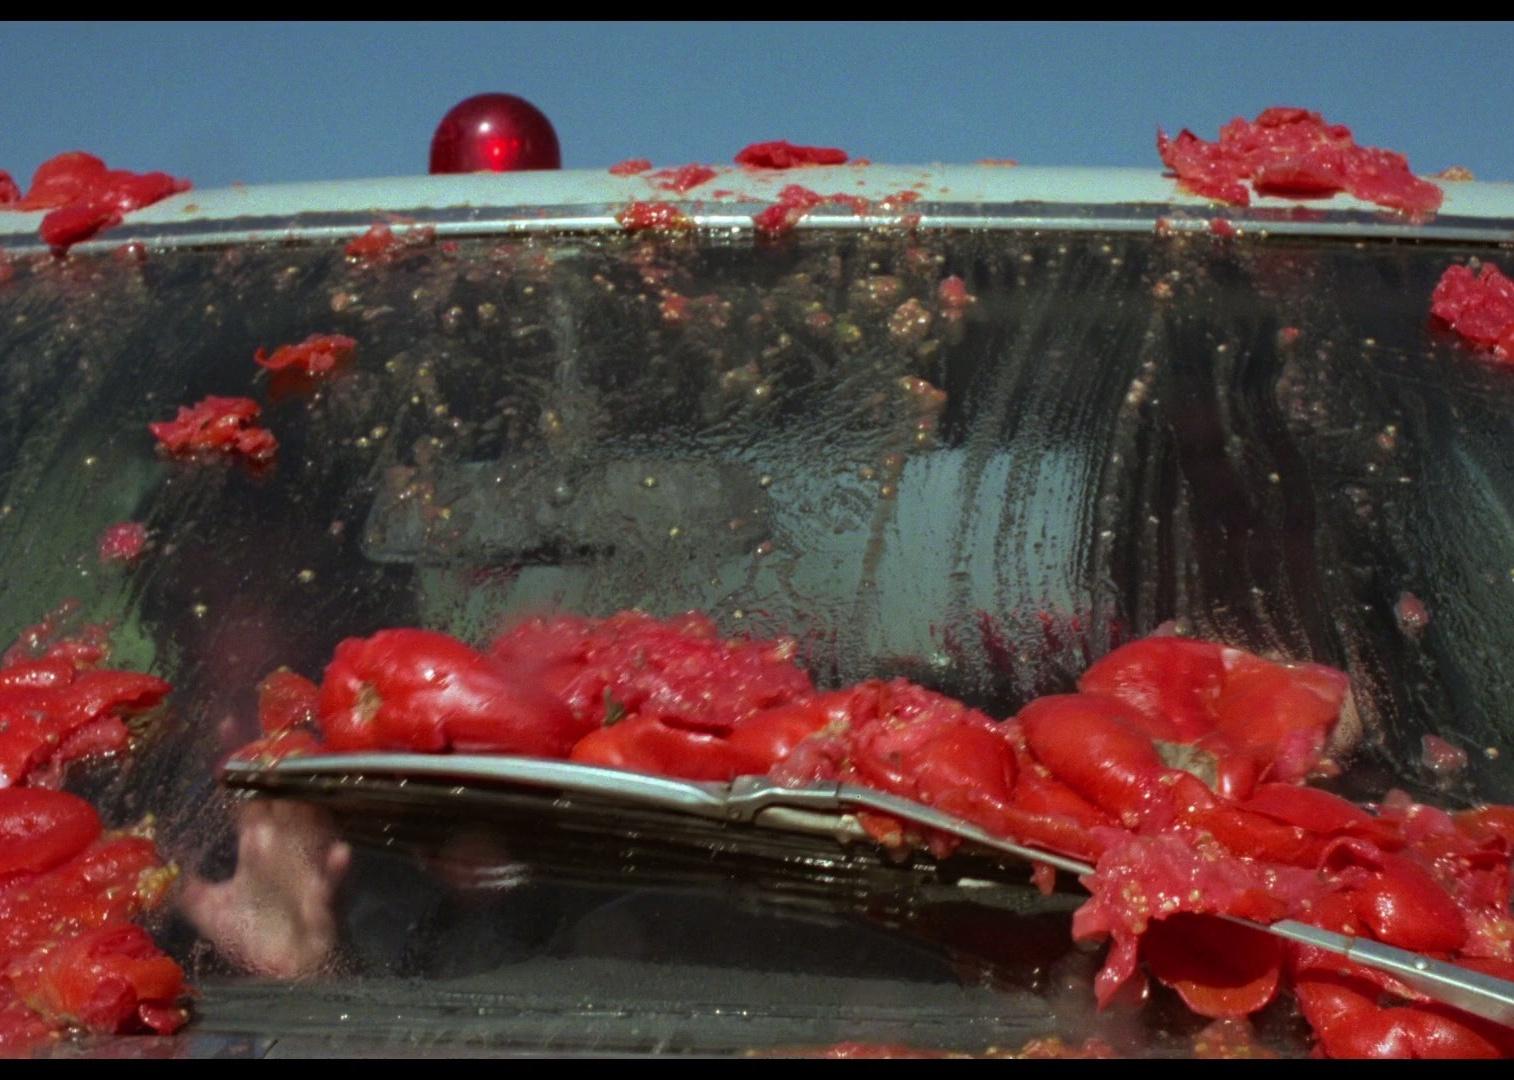 A car window covered in smashed tomatoes.